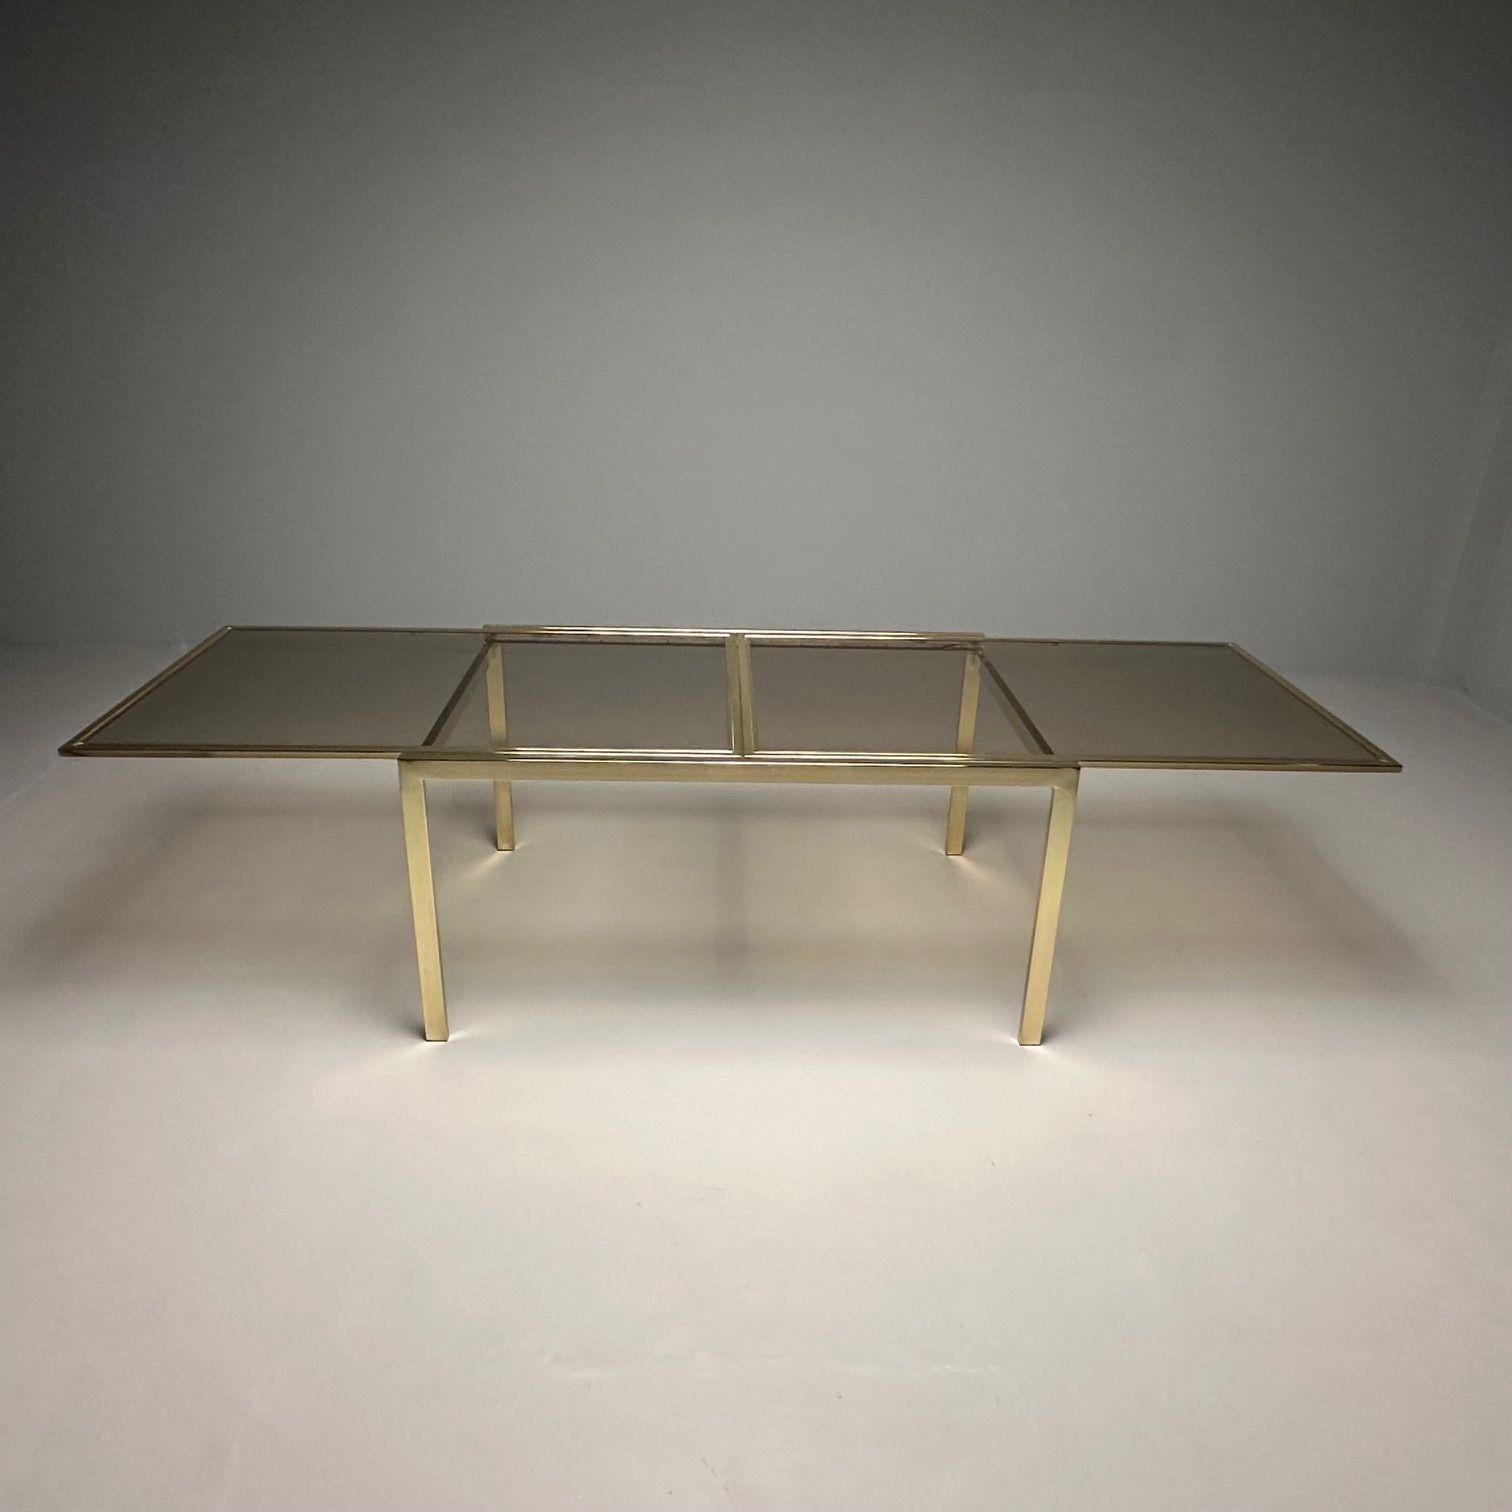 American Milo Baughman, DIA, Mid-Century Modern Dining Table, Smoked Glass, Brass, Canada For Sale